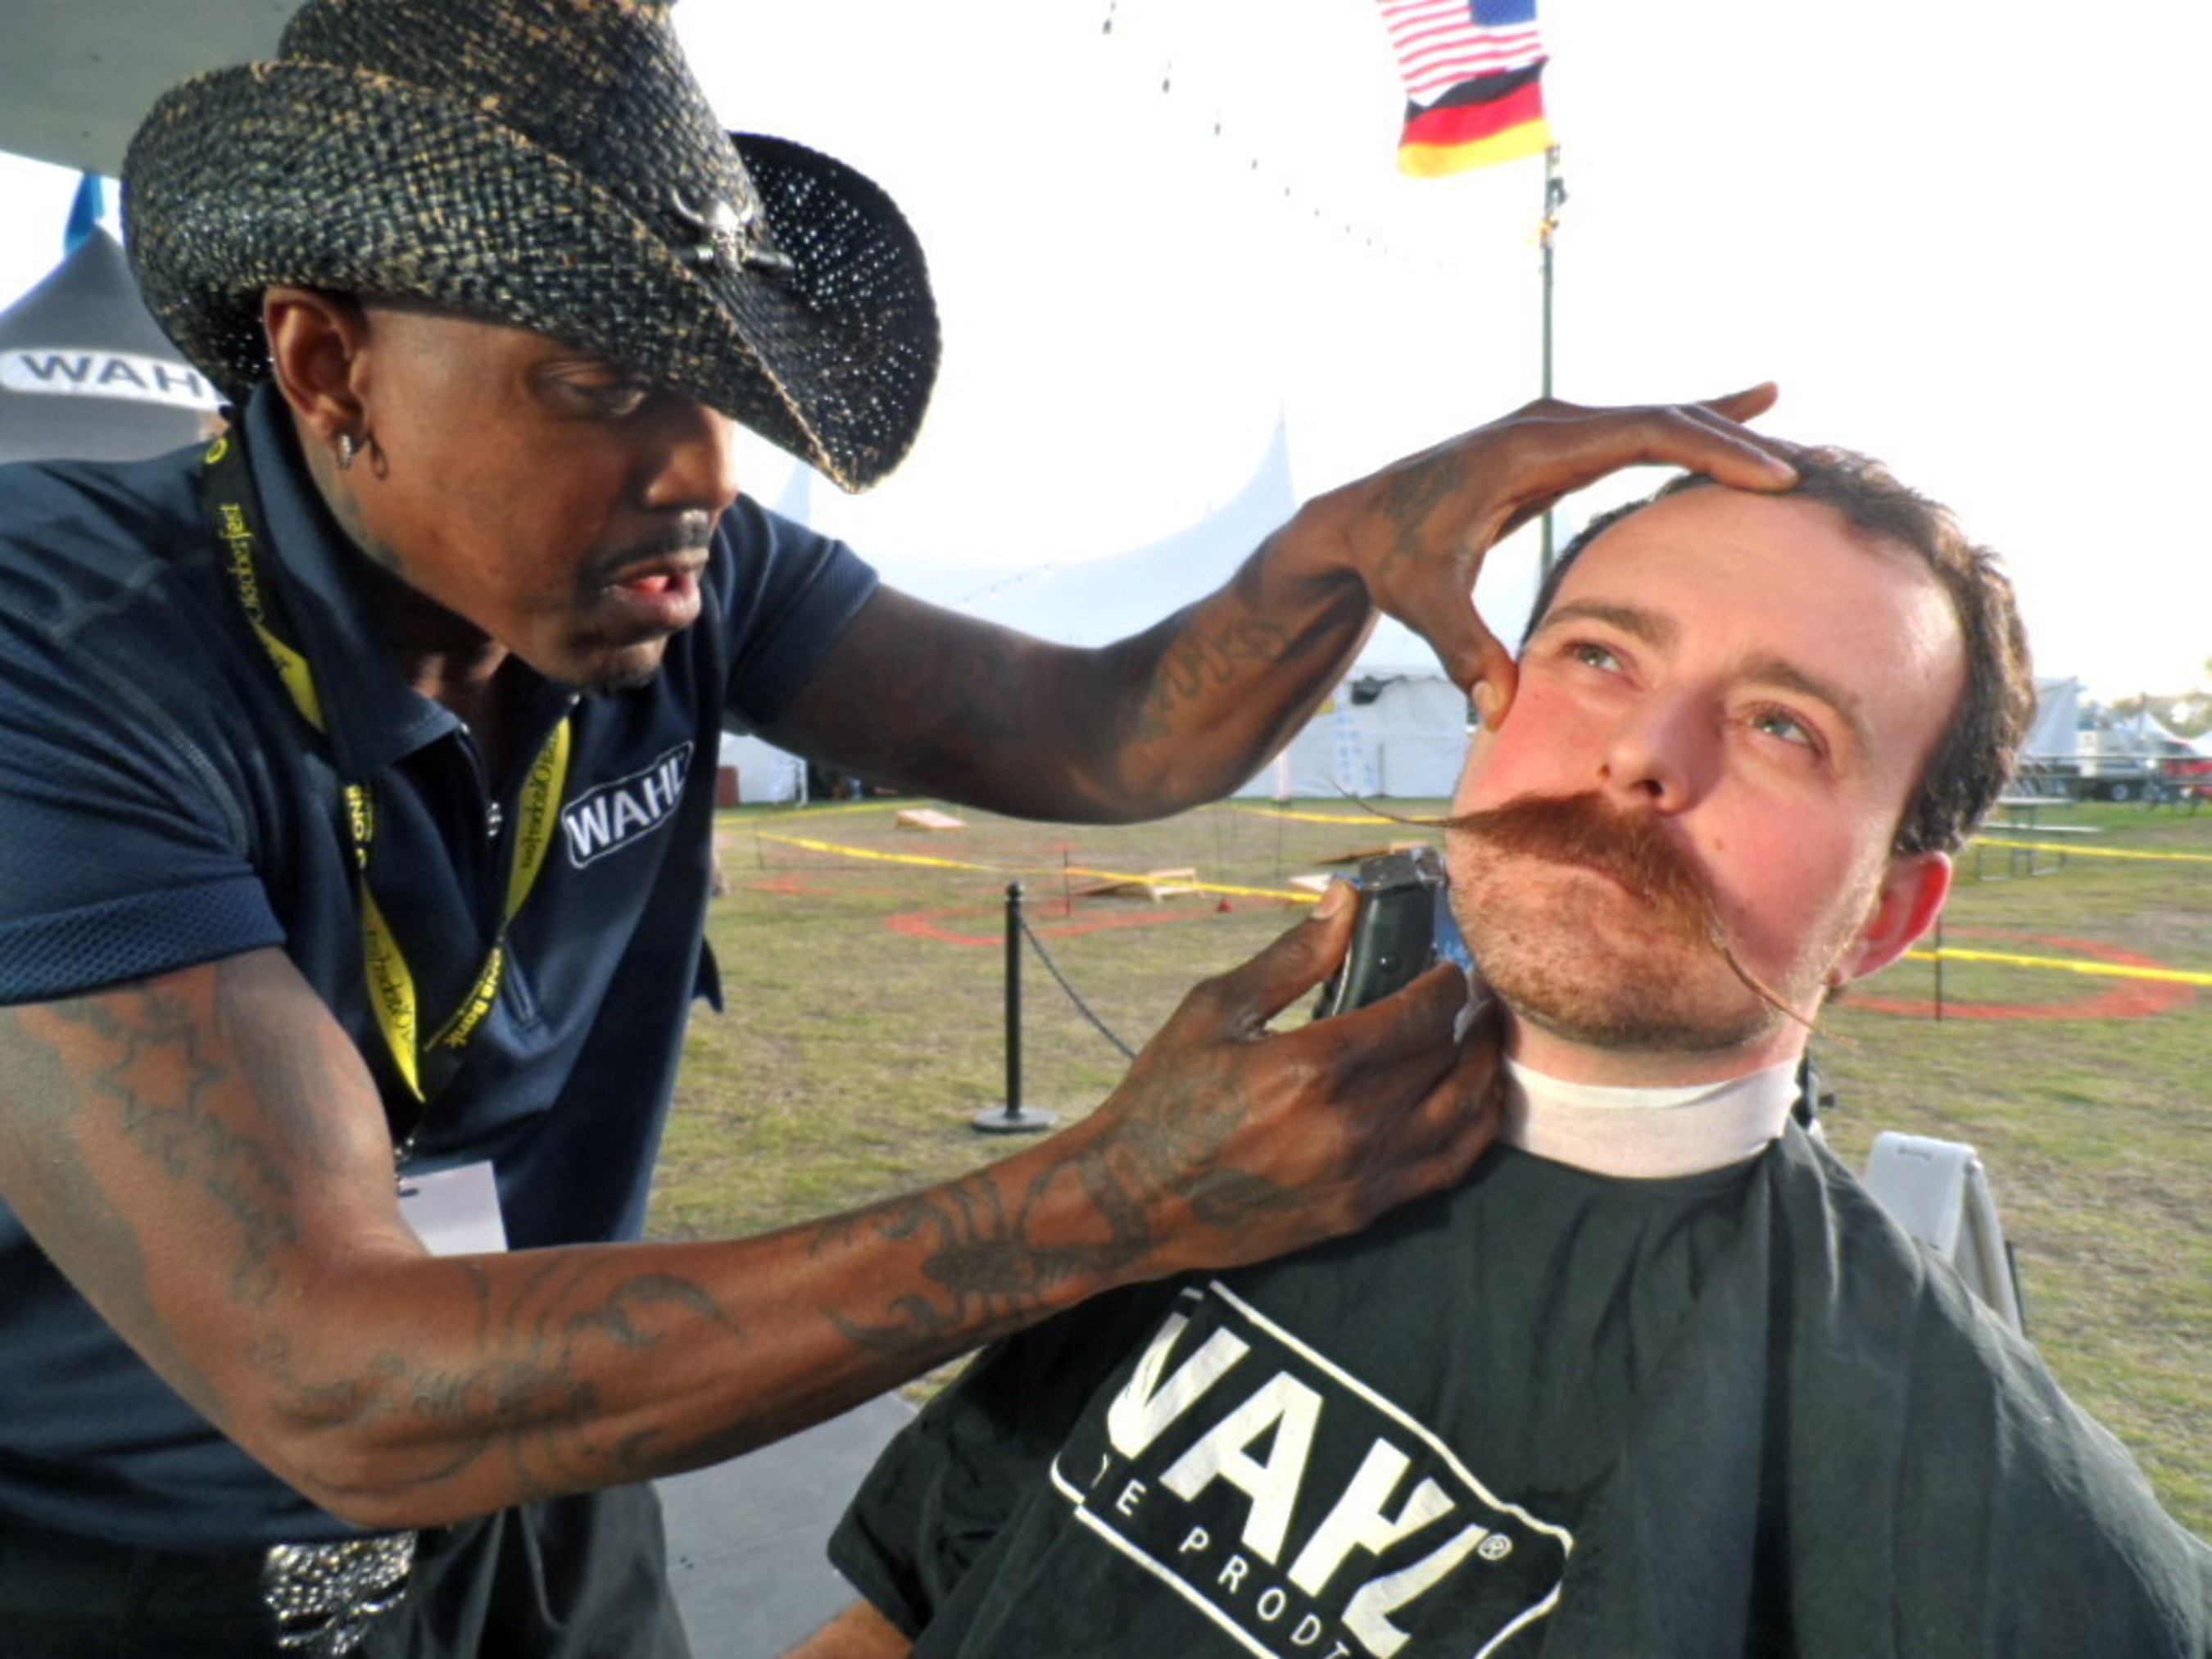 Wahl's mobile barbershop is visiting the 10 Most Facial Hair Friendly Cities in America offering free trims.